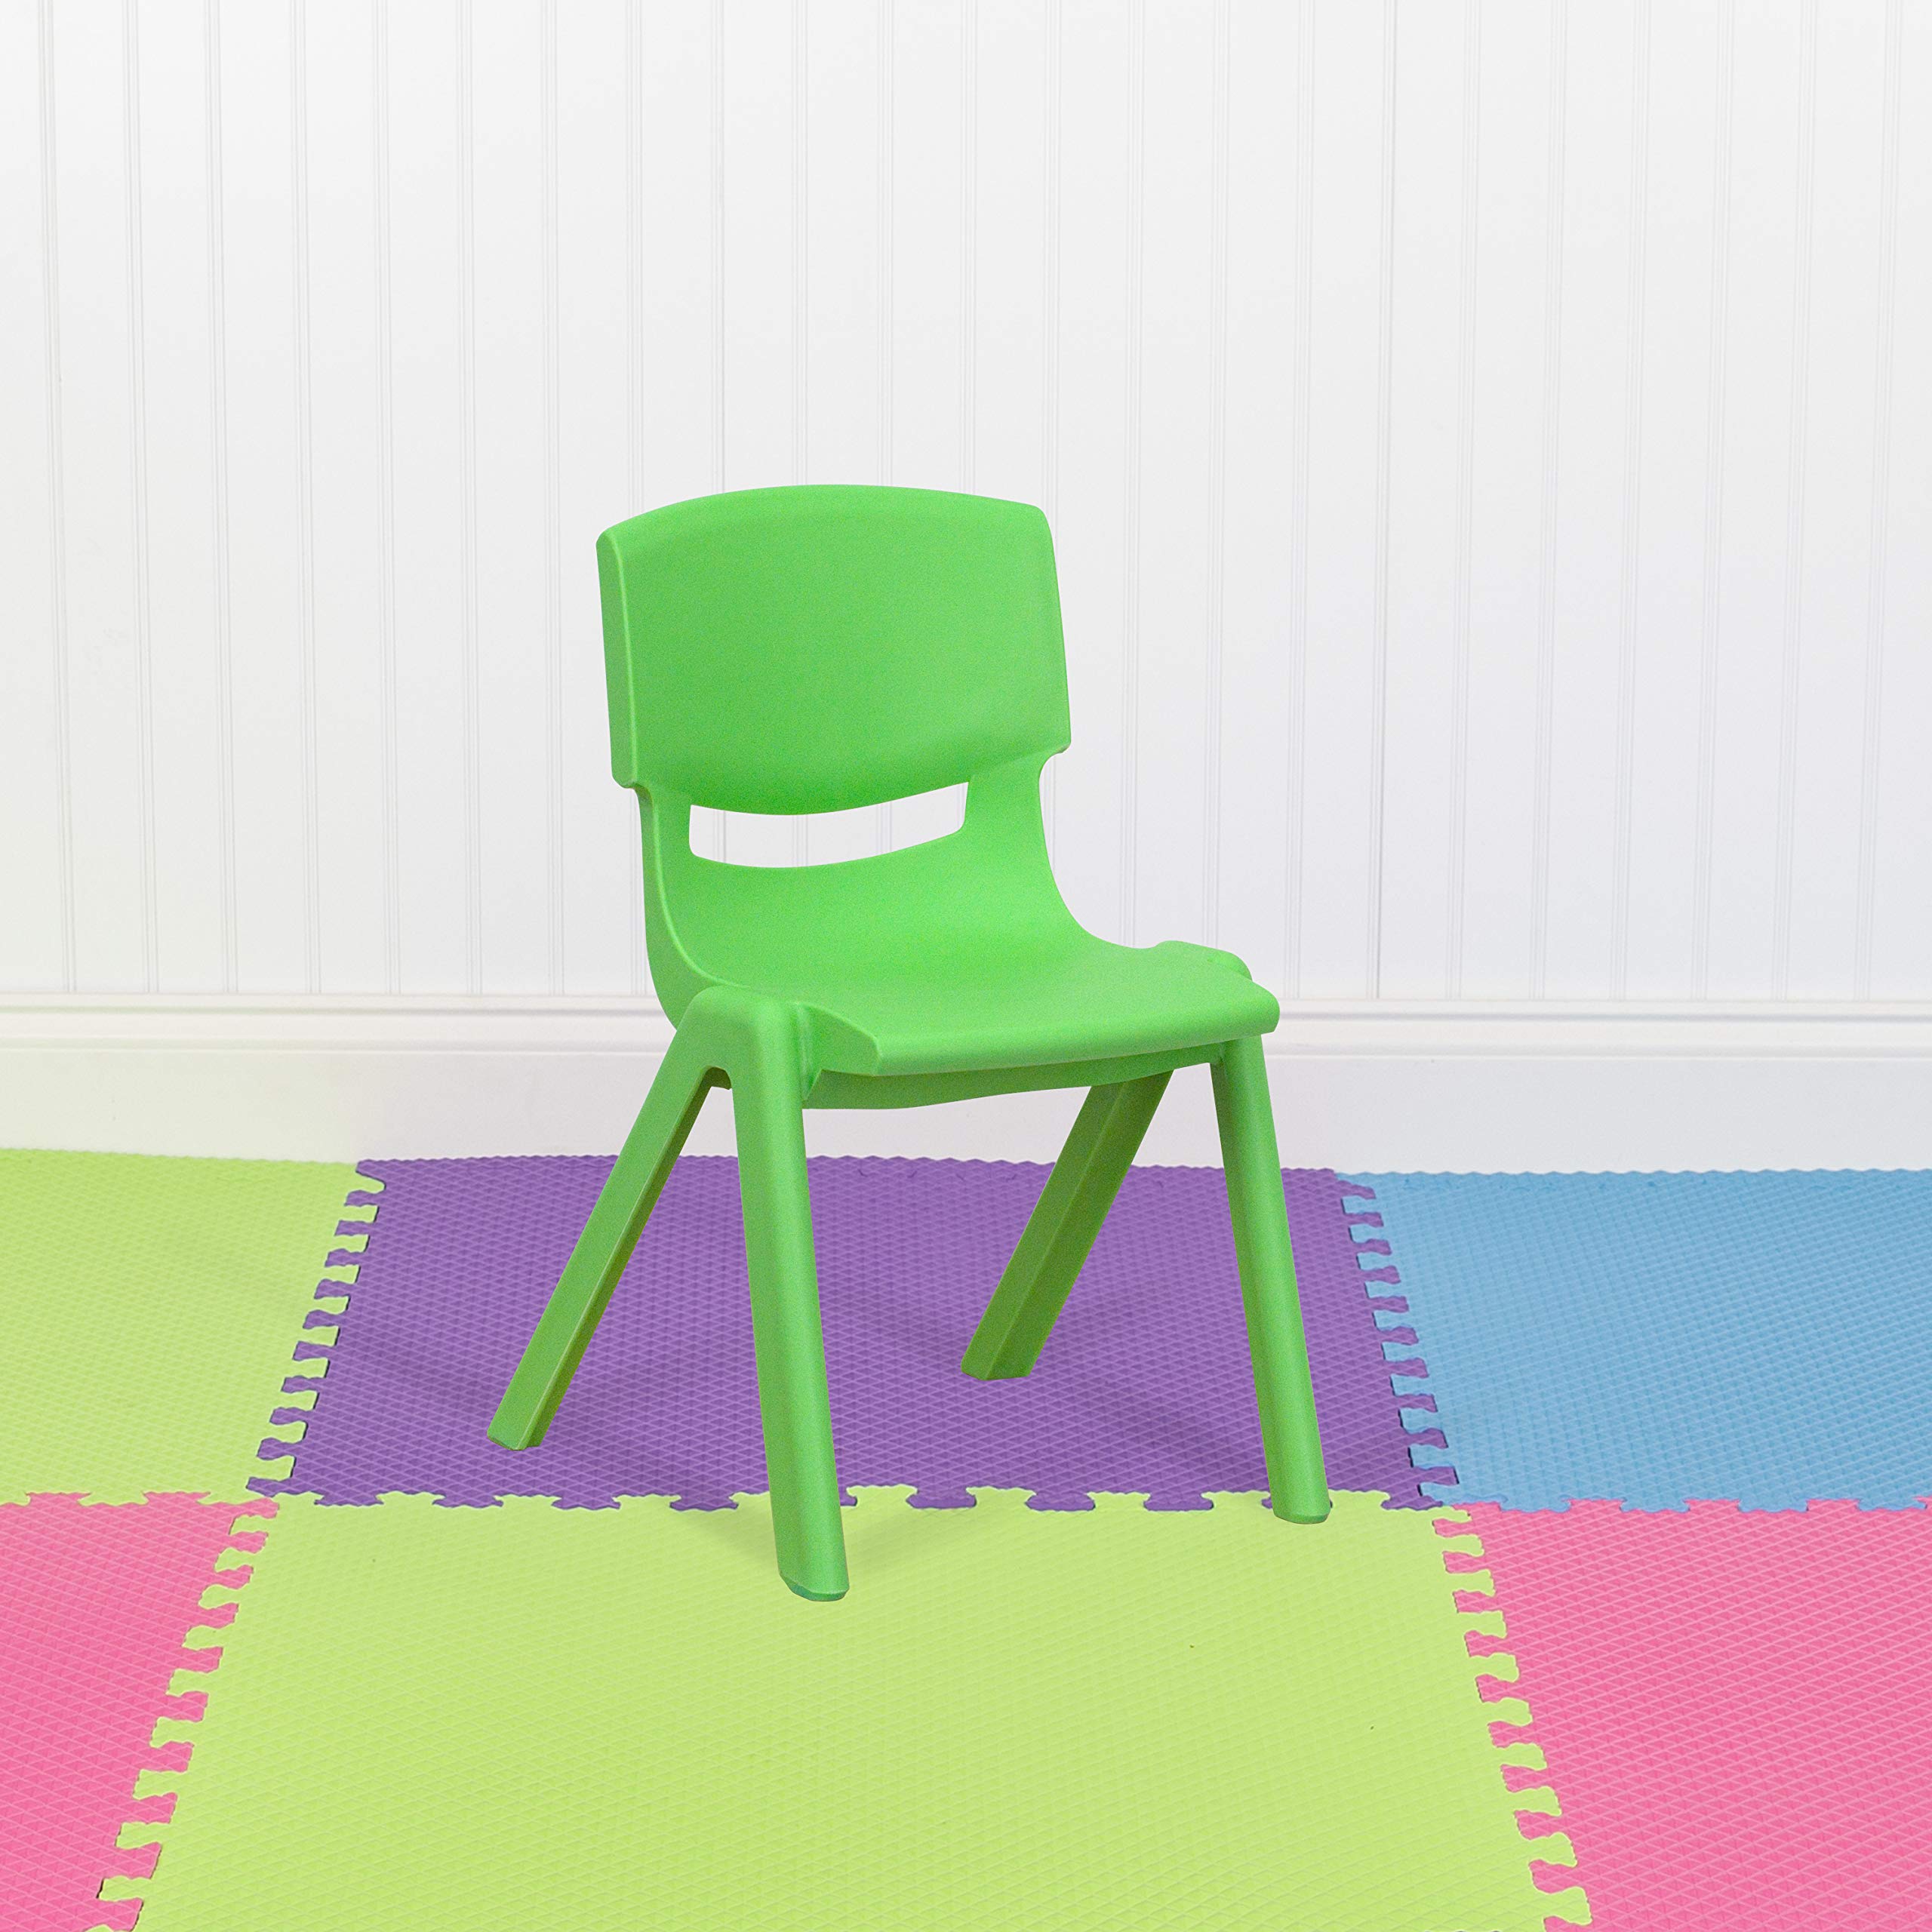 Flash Furniture 10 Pk. Green Plastic Stackable School Chair with 13.25'' Seat Height - $192